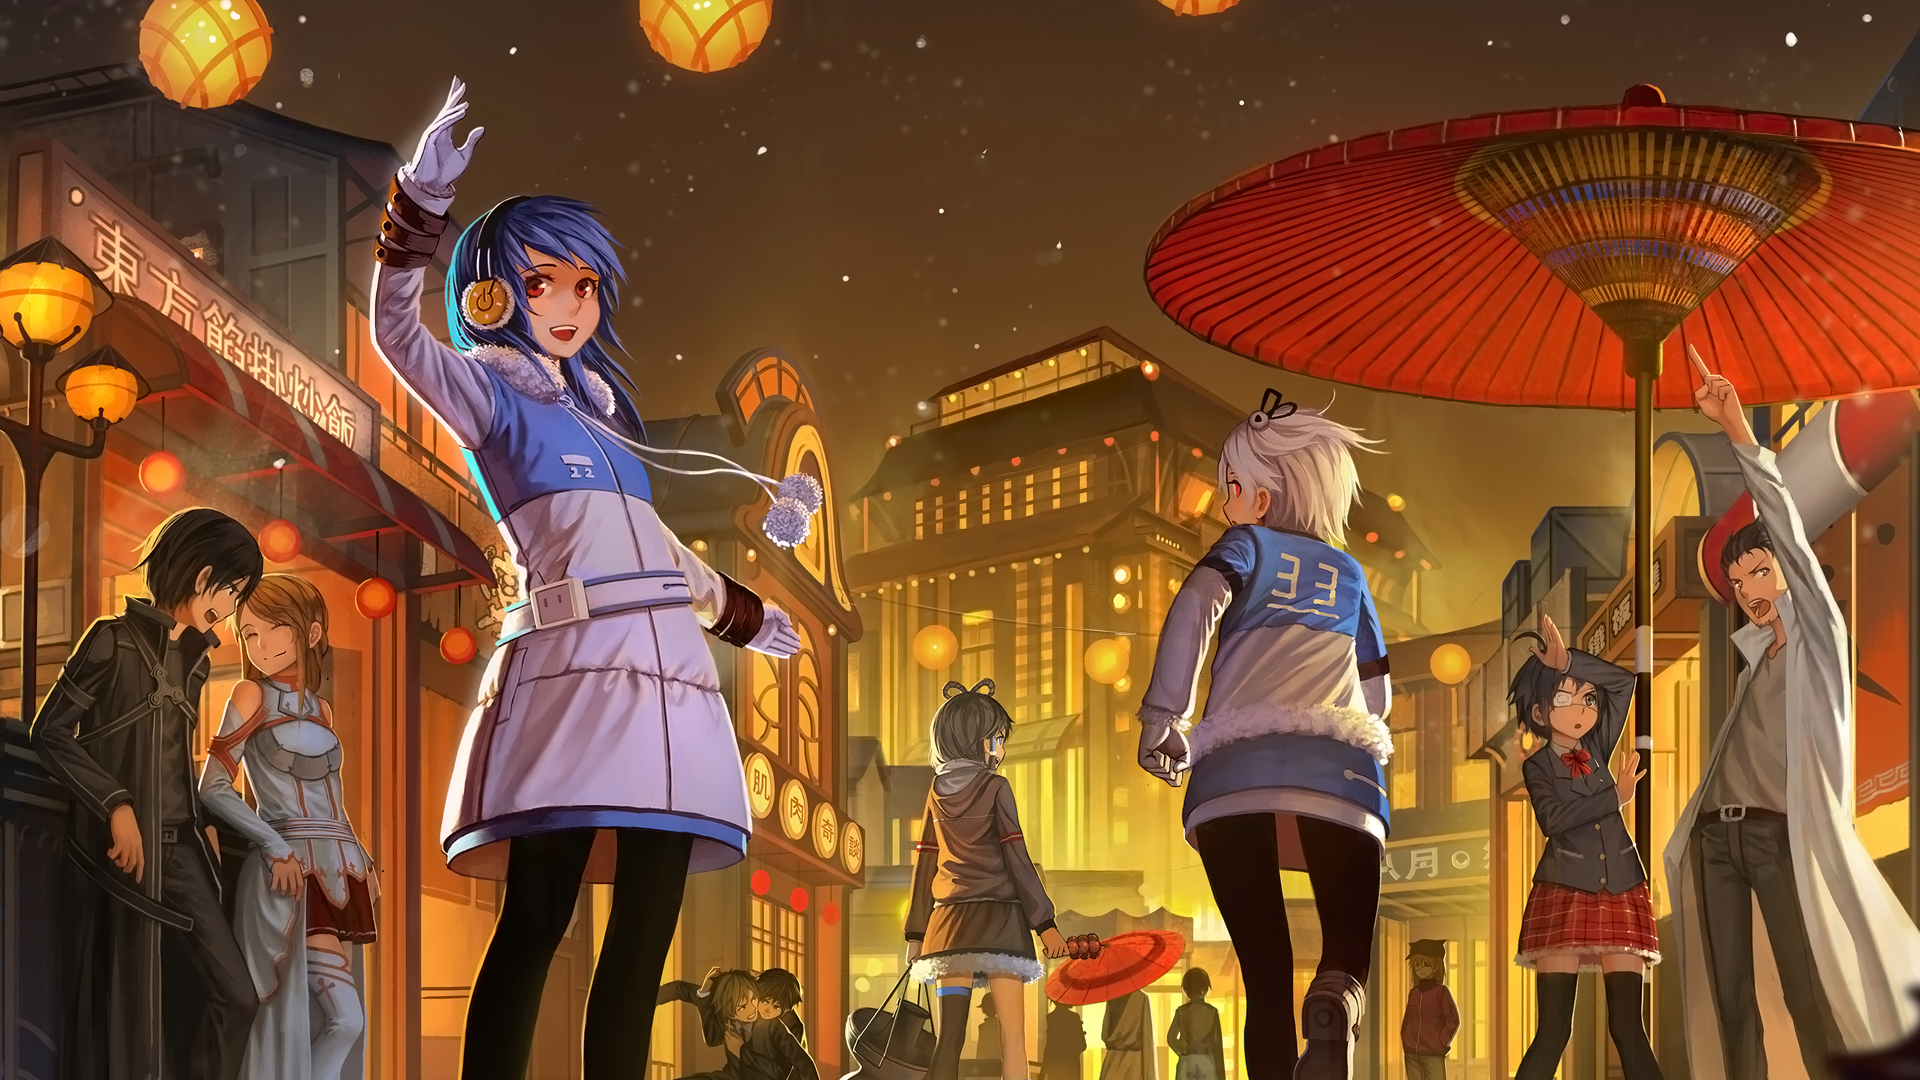 Anime 1920x1080 anime girls anime blue hair city arms up red eyes numbers urban city lights